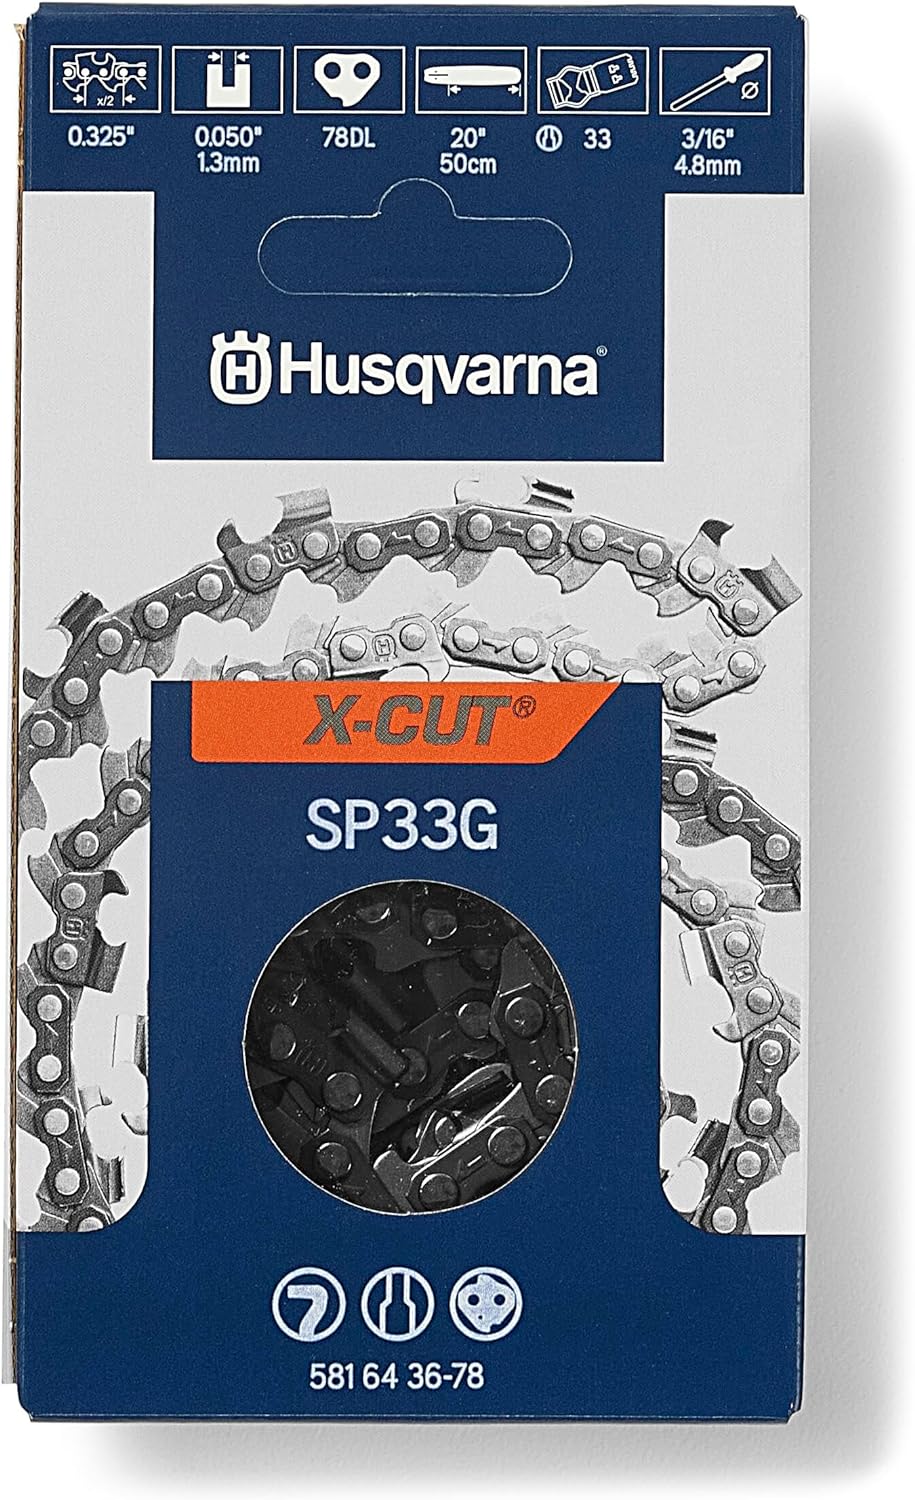 Husqvarna X-Cut SP33G 20 Inch Chainsaw Chain, .325" Pitch, .050" Gauge, 78 Drive Links, Pre-Stretched Chainsaw Blade Replacement with Superior Lubrication and Low Kickback, Gray